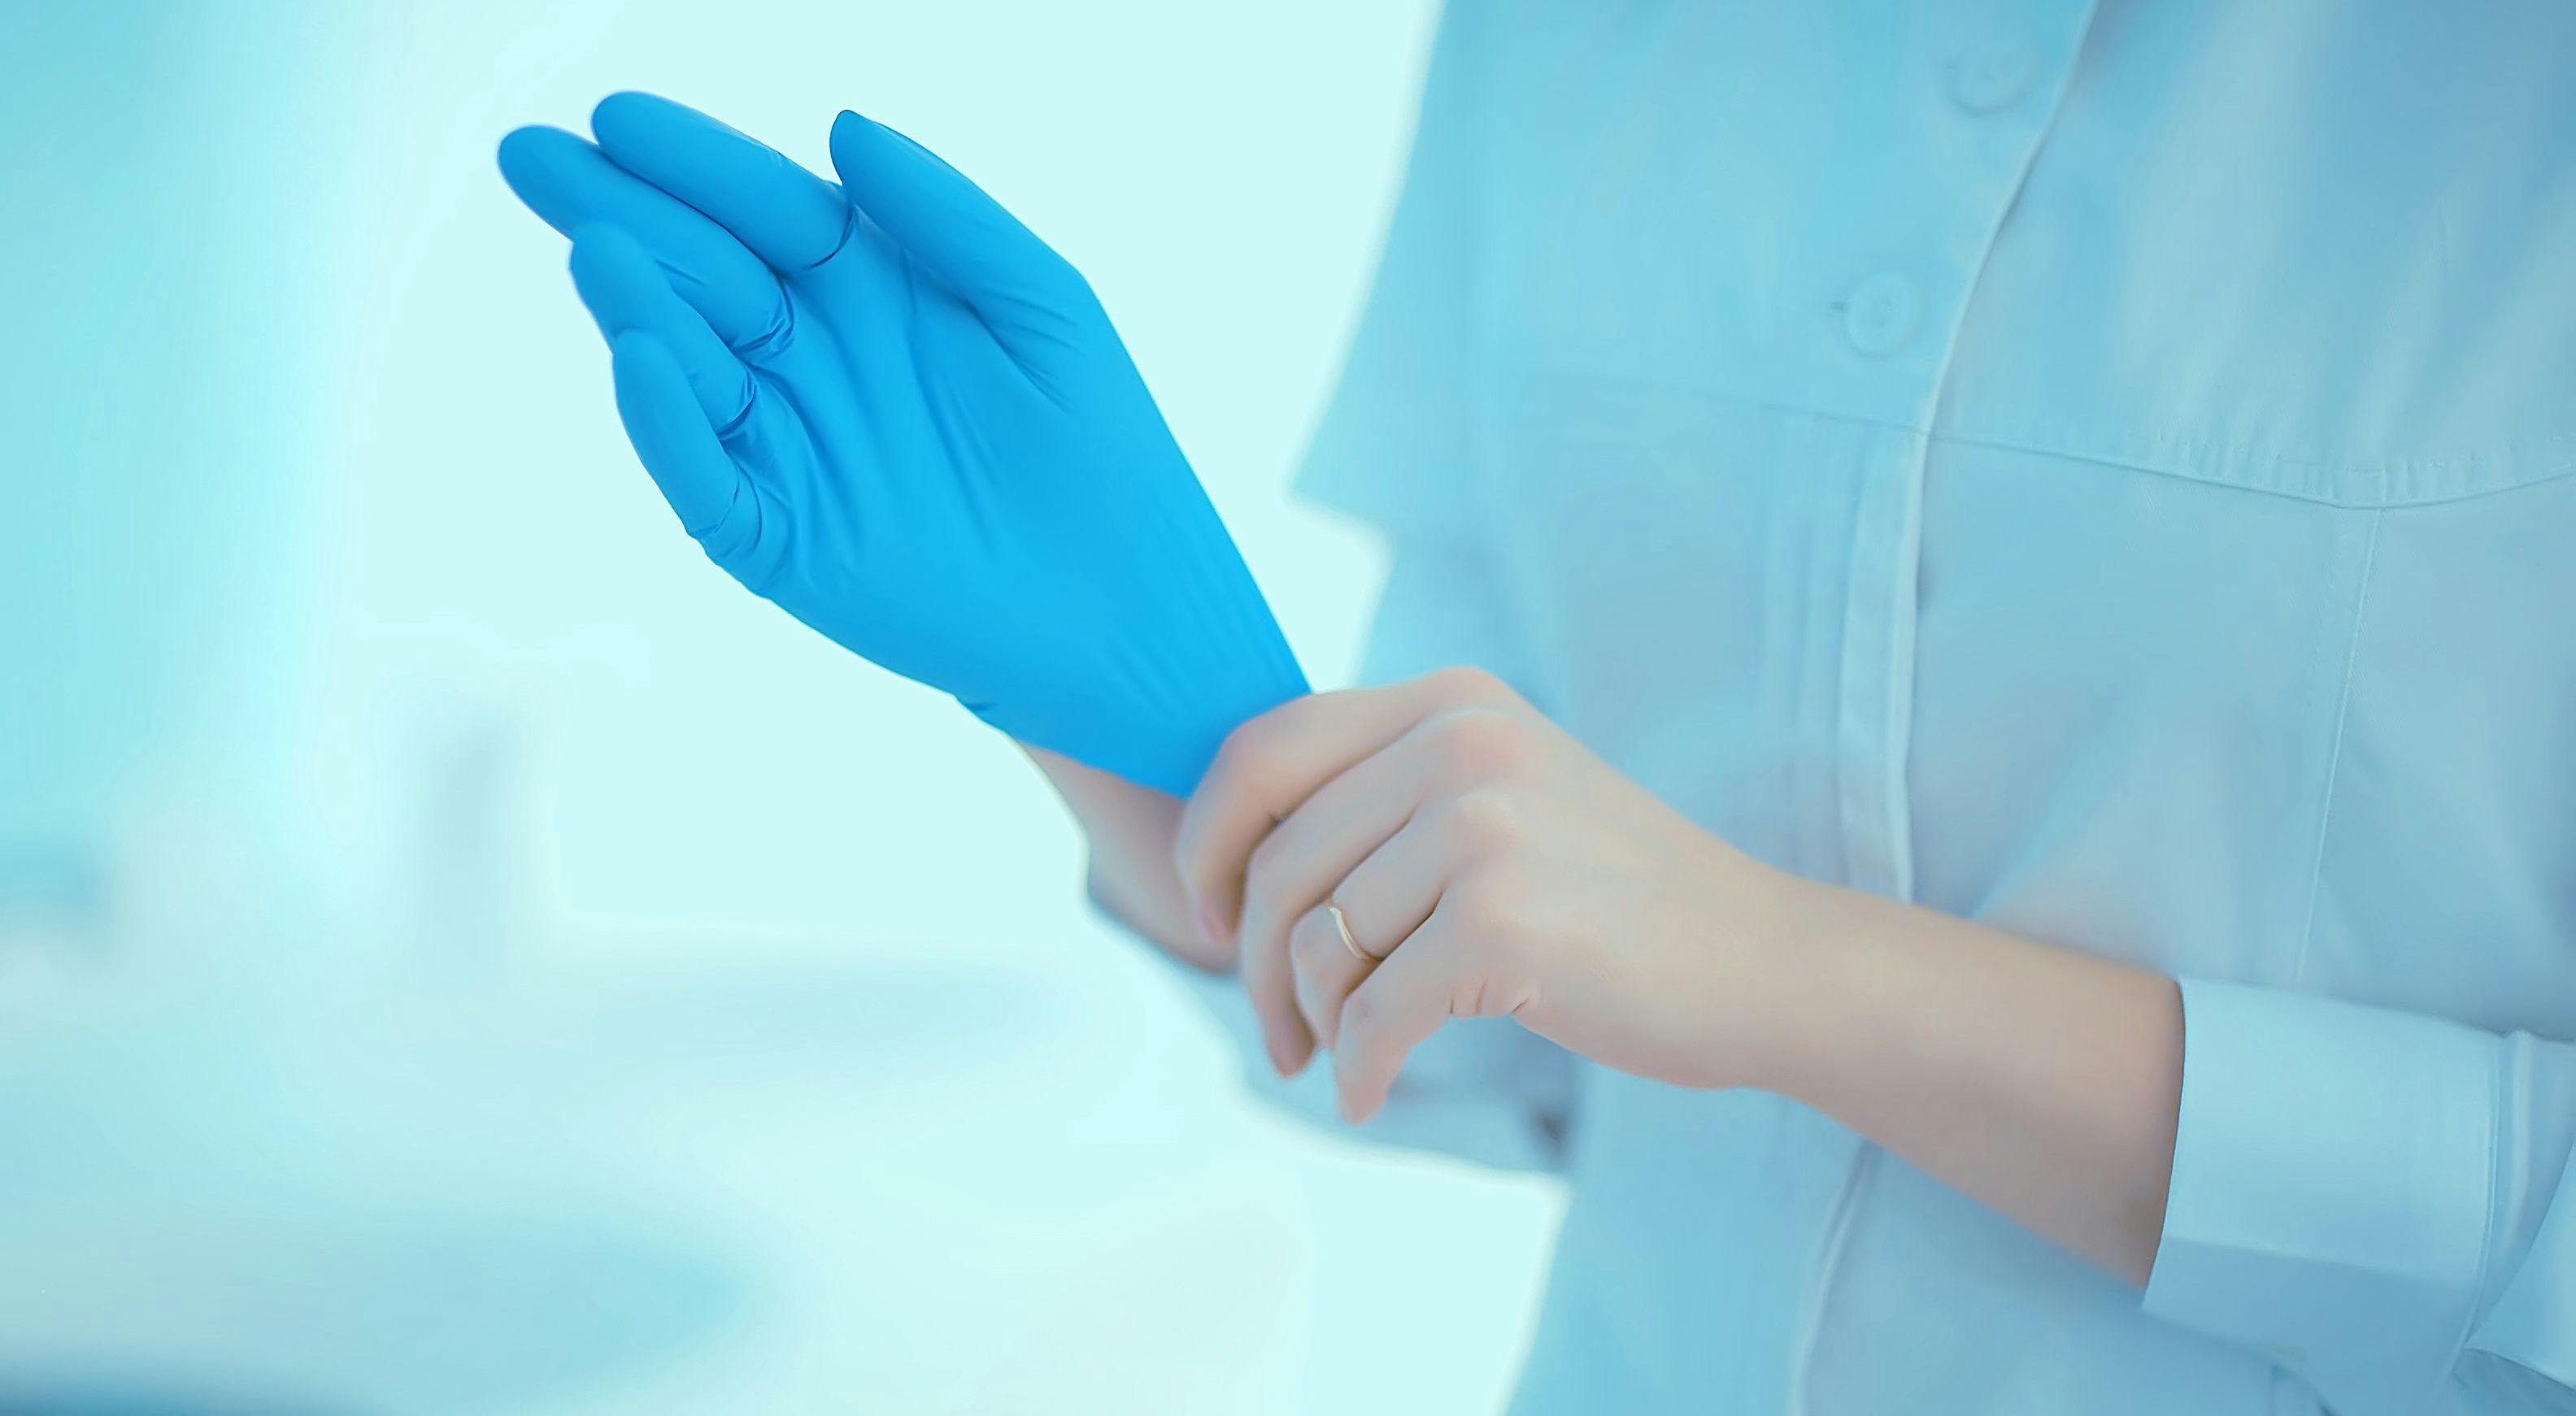 ONS Publishes Guidelines for Personal Protective Equipment Use During COVID-19 Pandemic